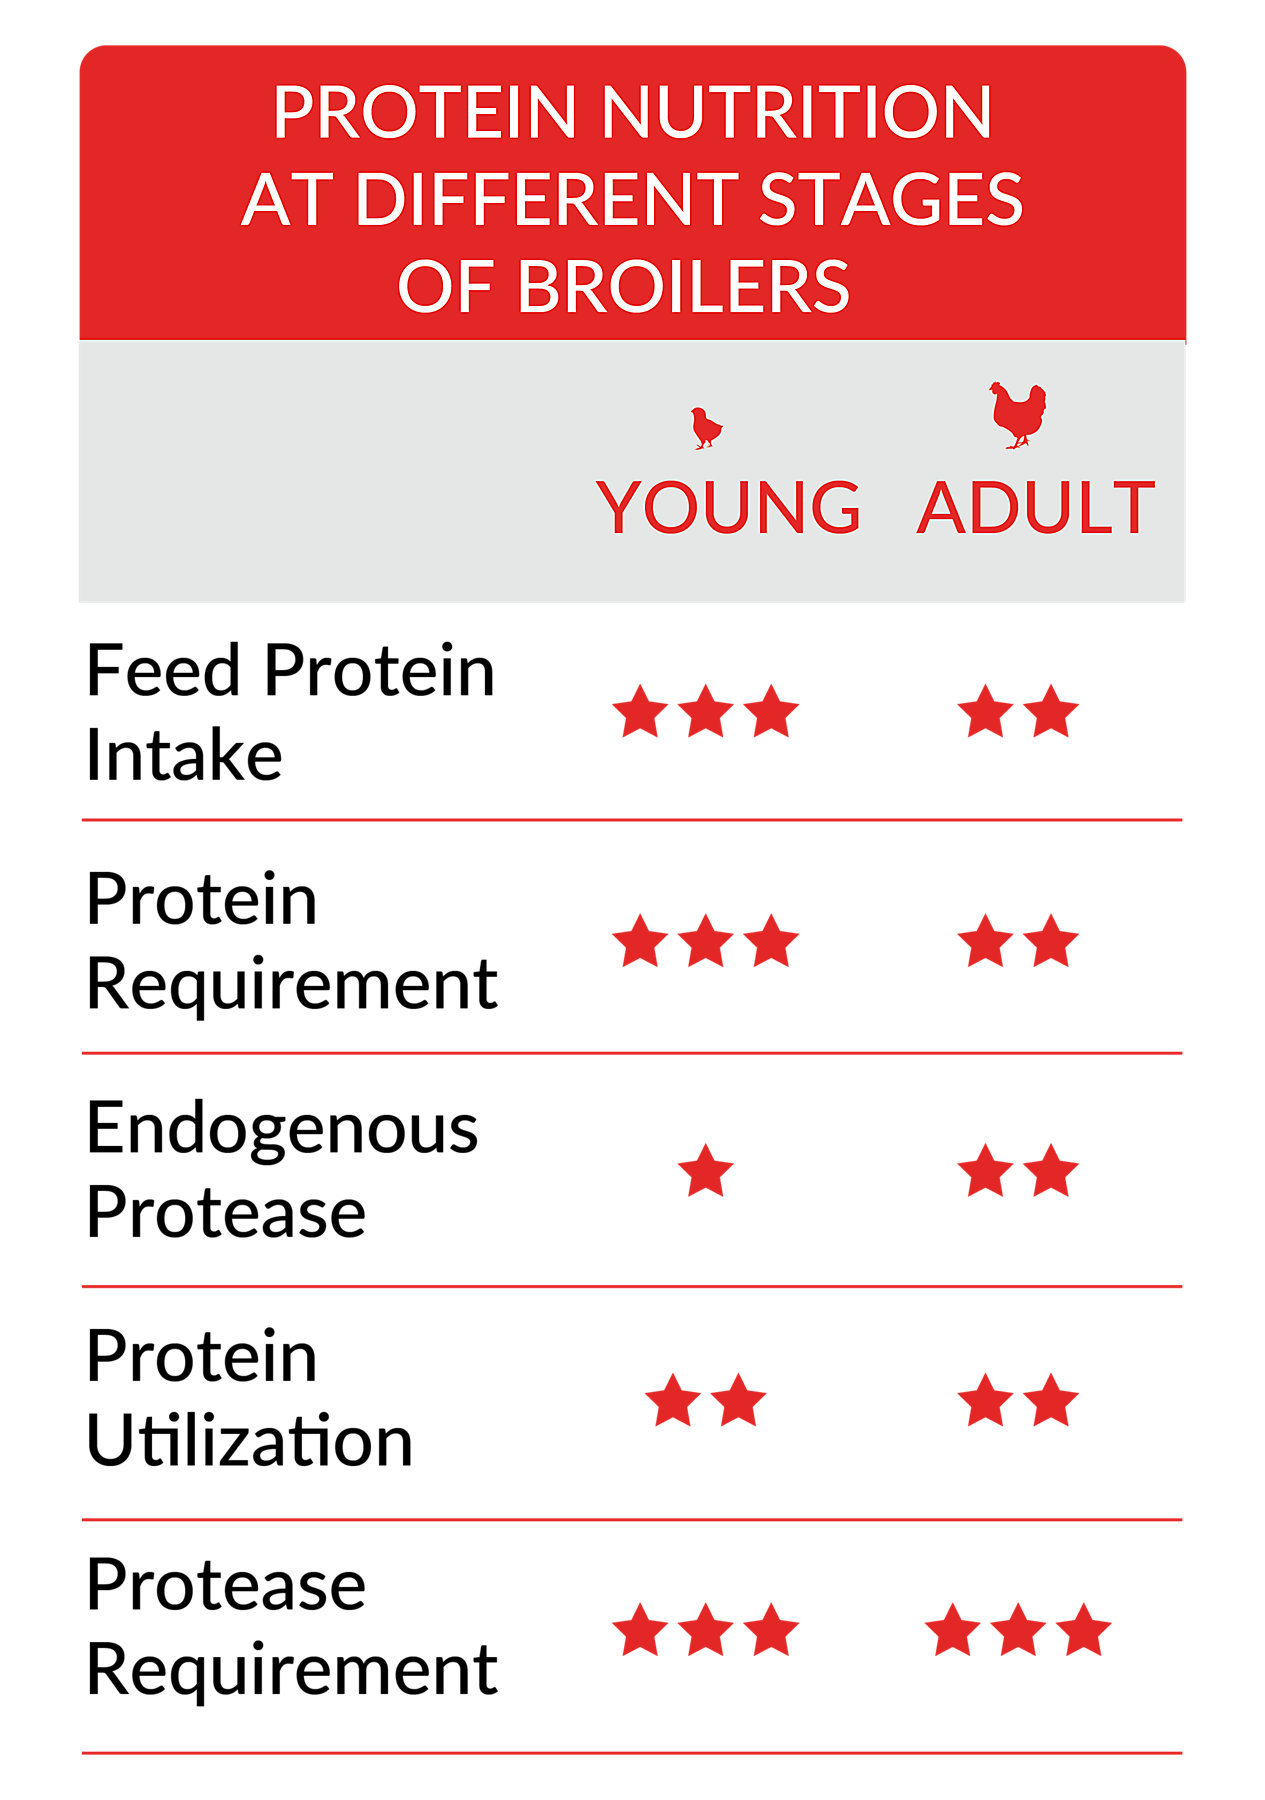 PROTEIN EFFICIENCY AND PROTEIN NUTRIENT broiler infographic